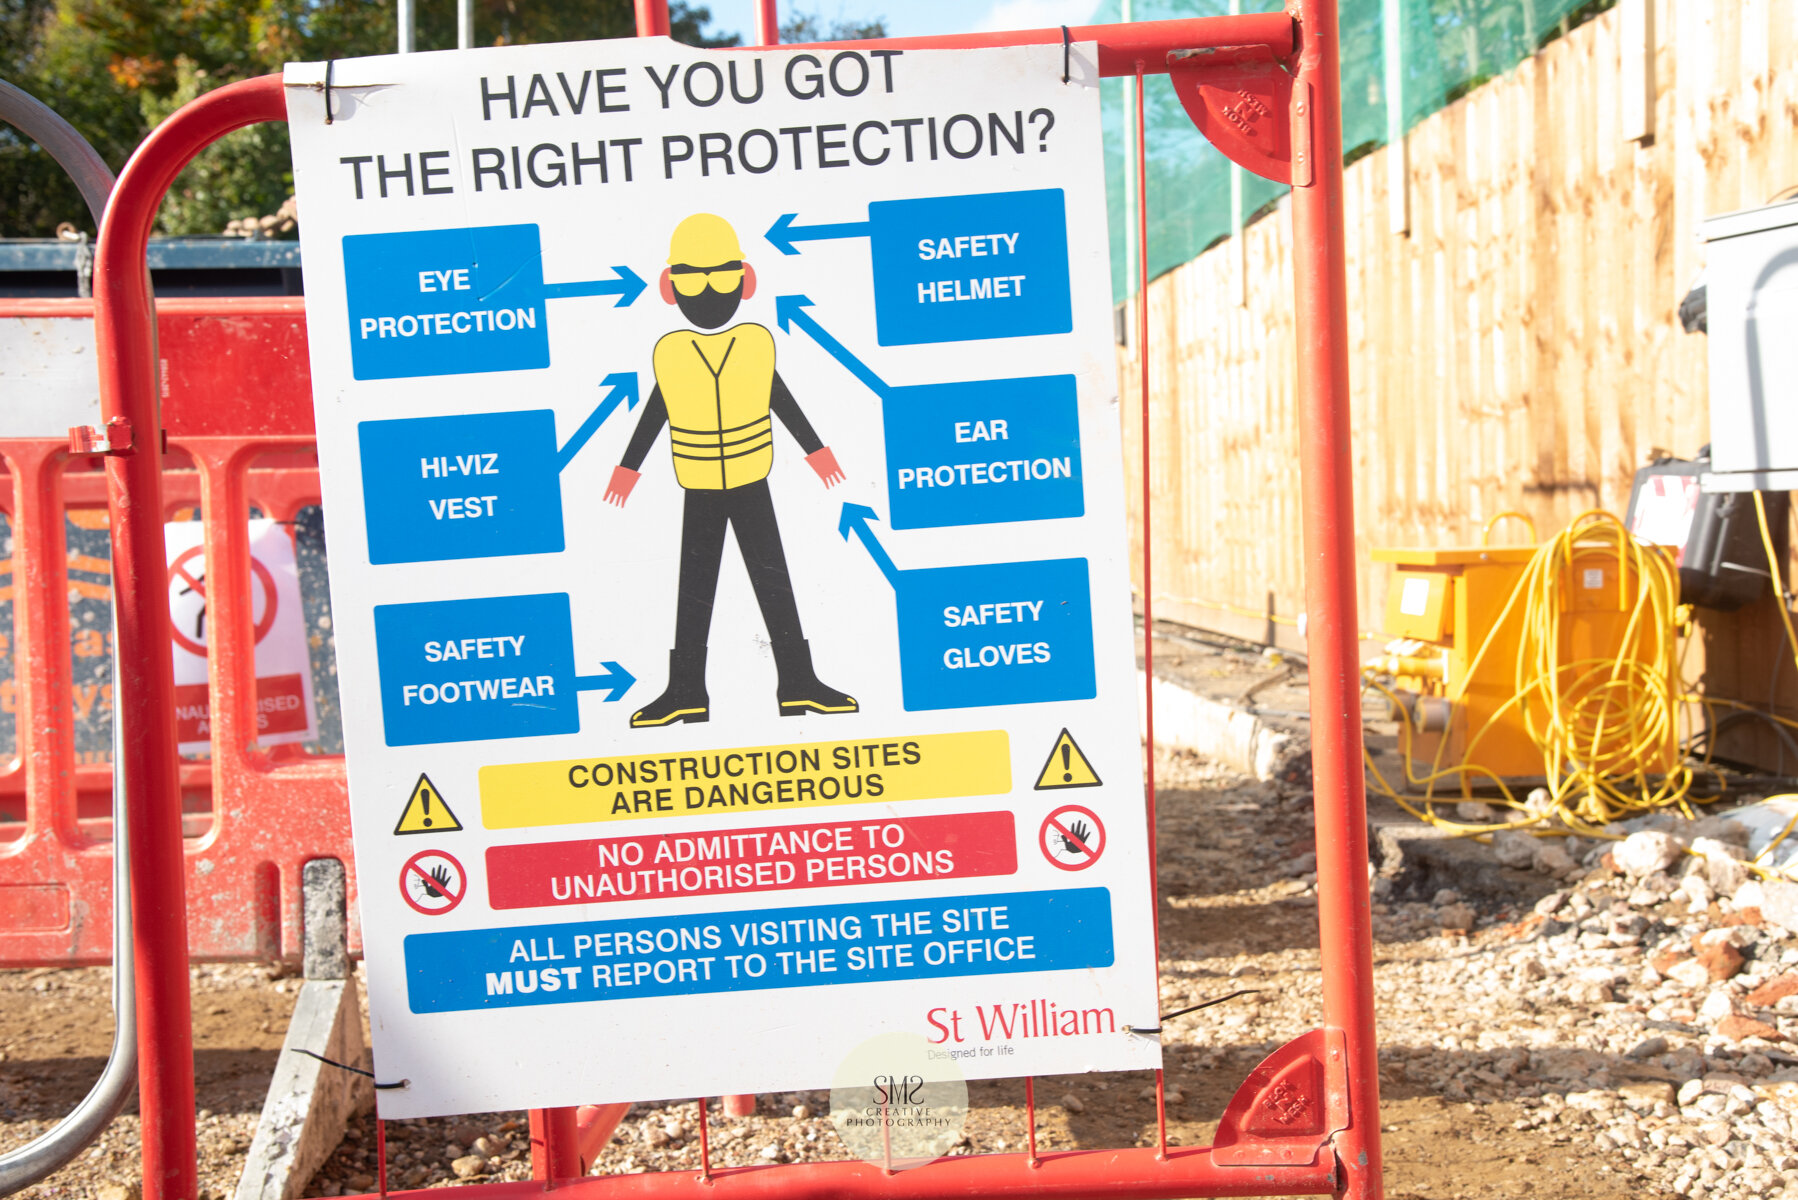  Protective wear must be worn at all times on site. 